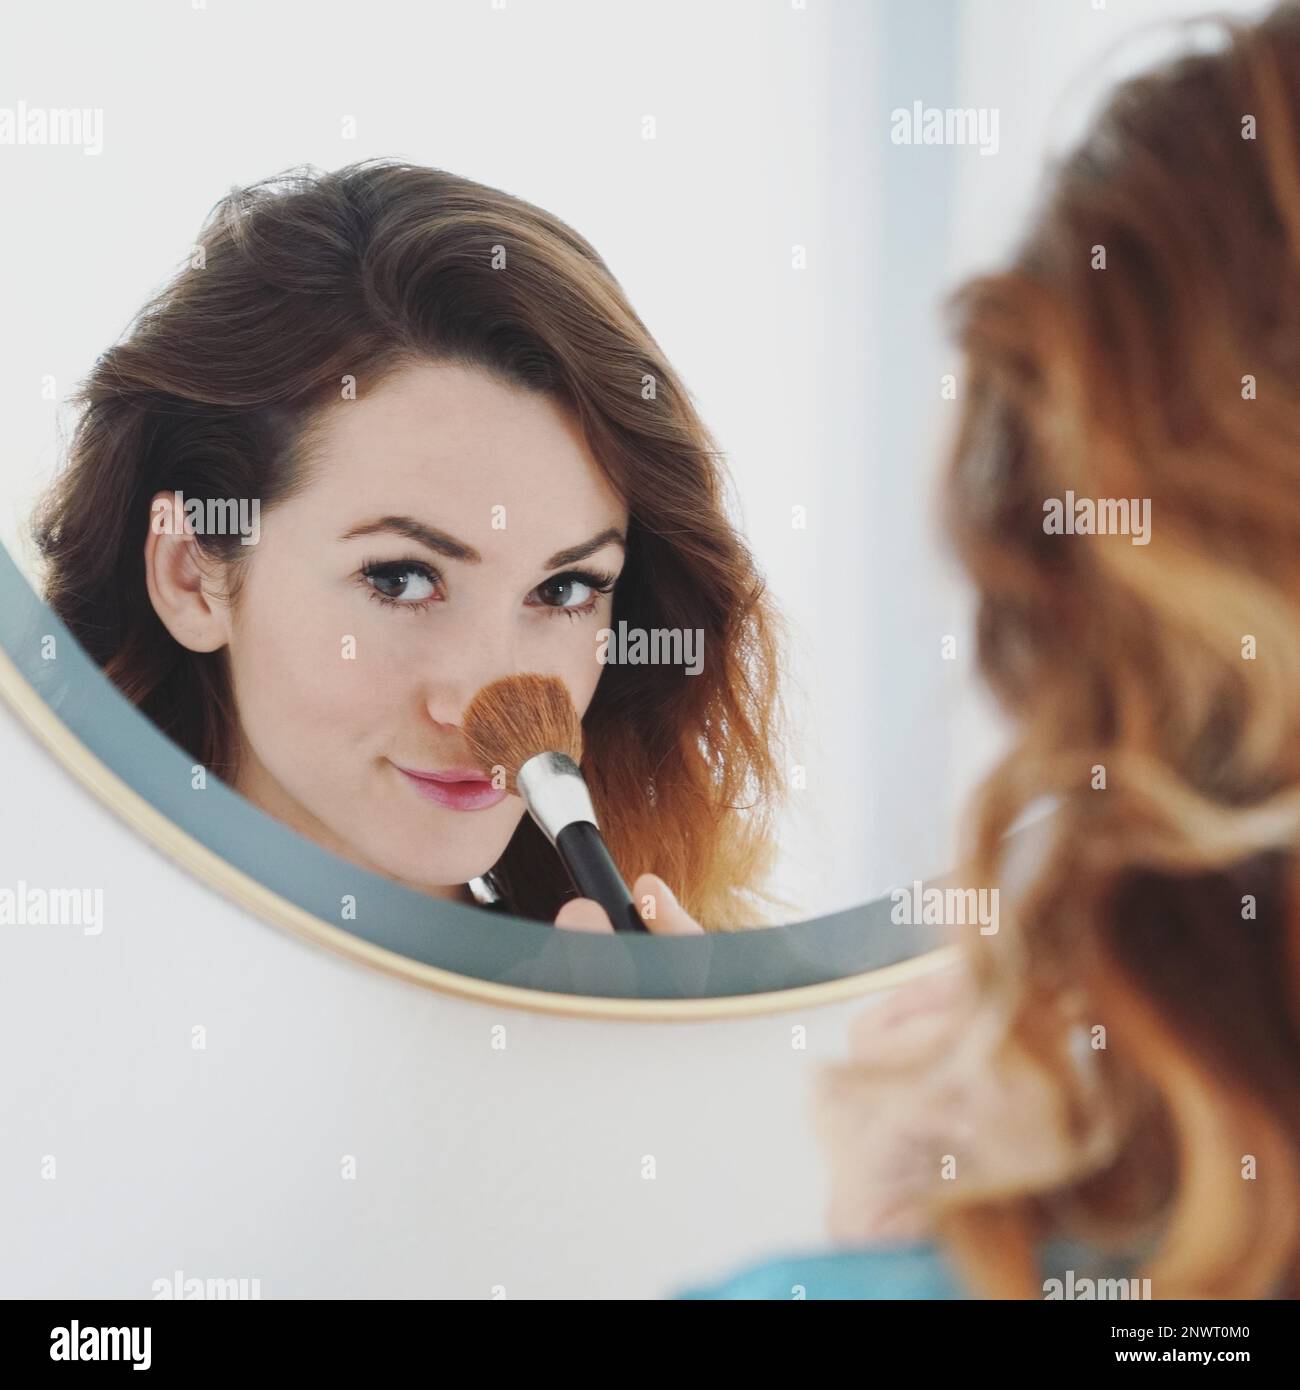 young woman powdering her nose with make-up brush, bathroom mirror, portrait with selective focus Stock Photo